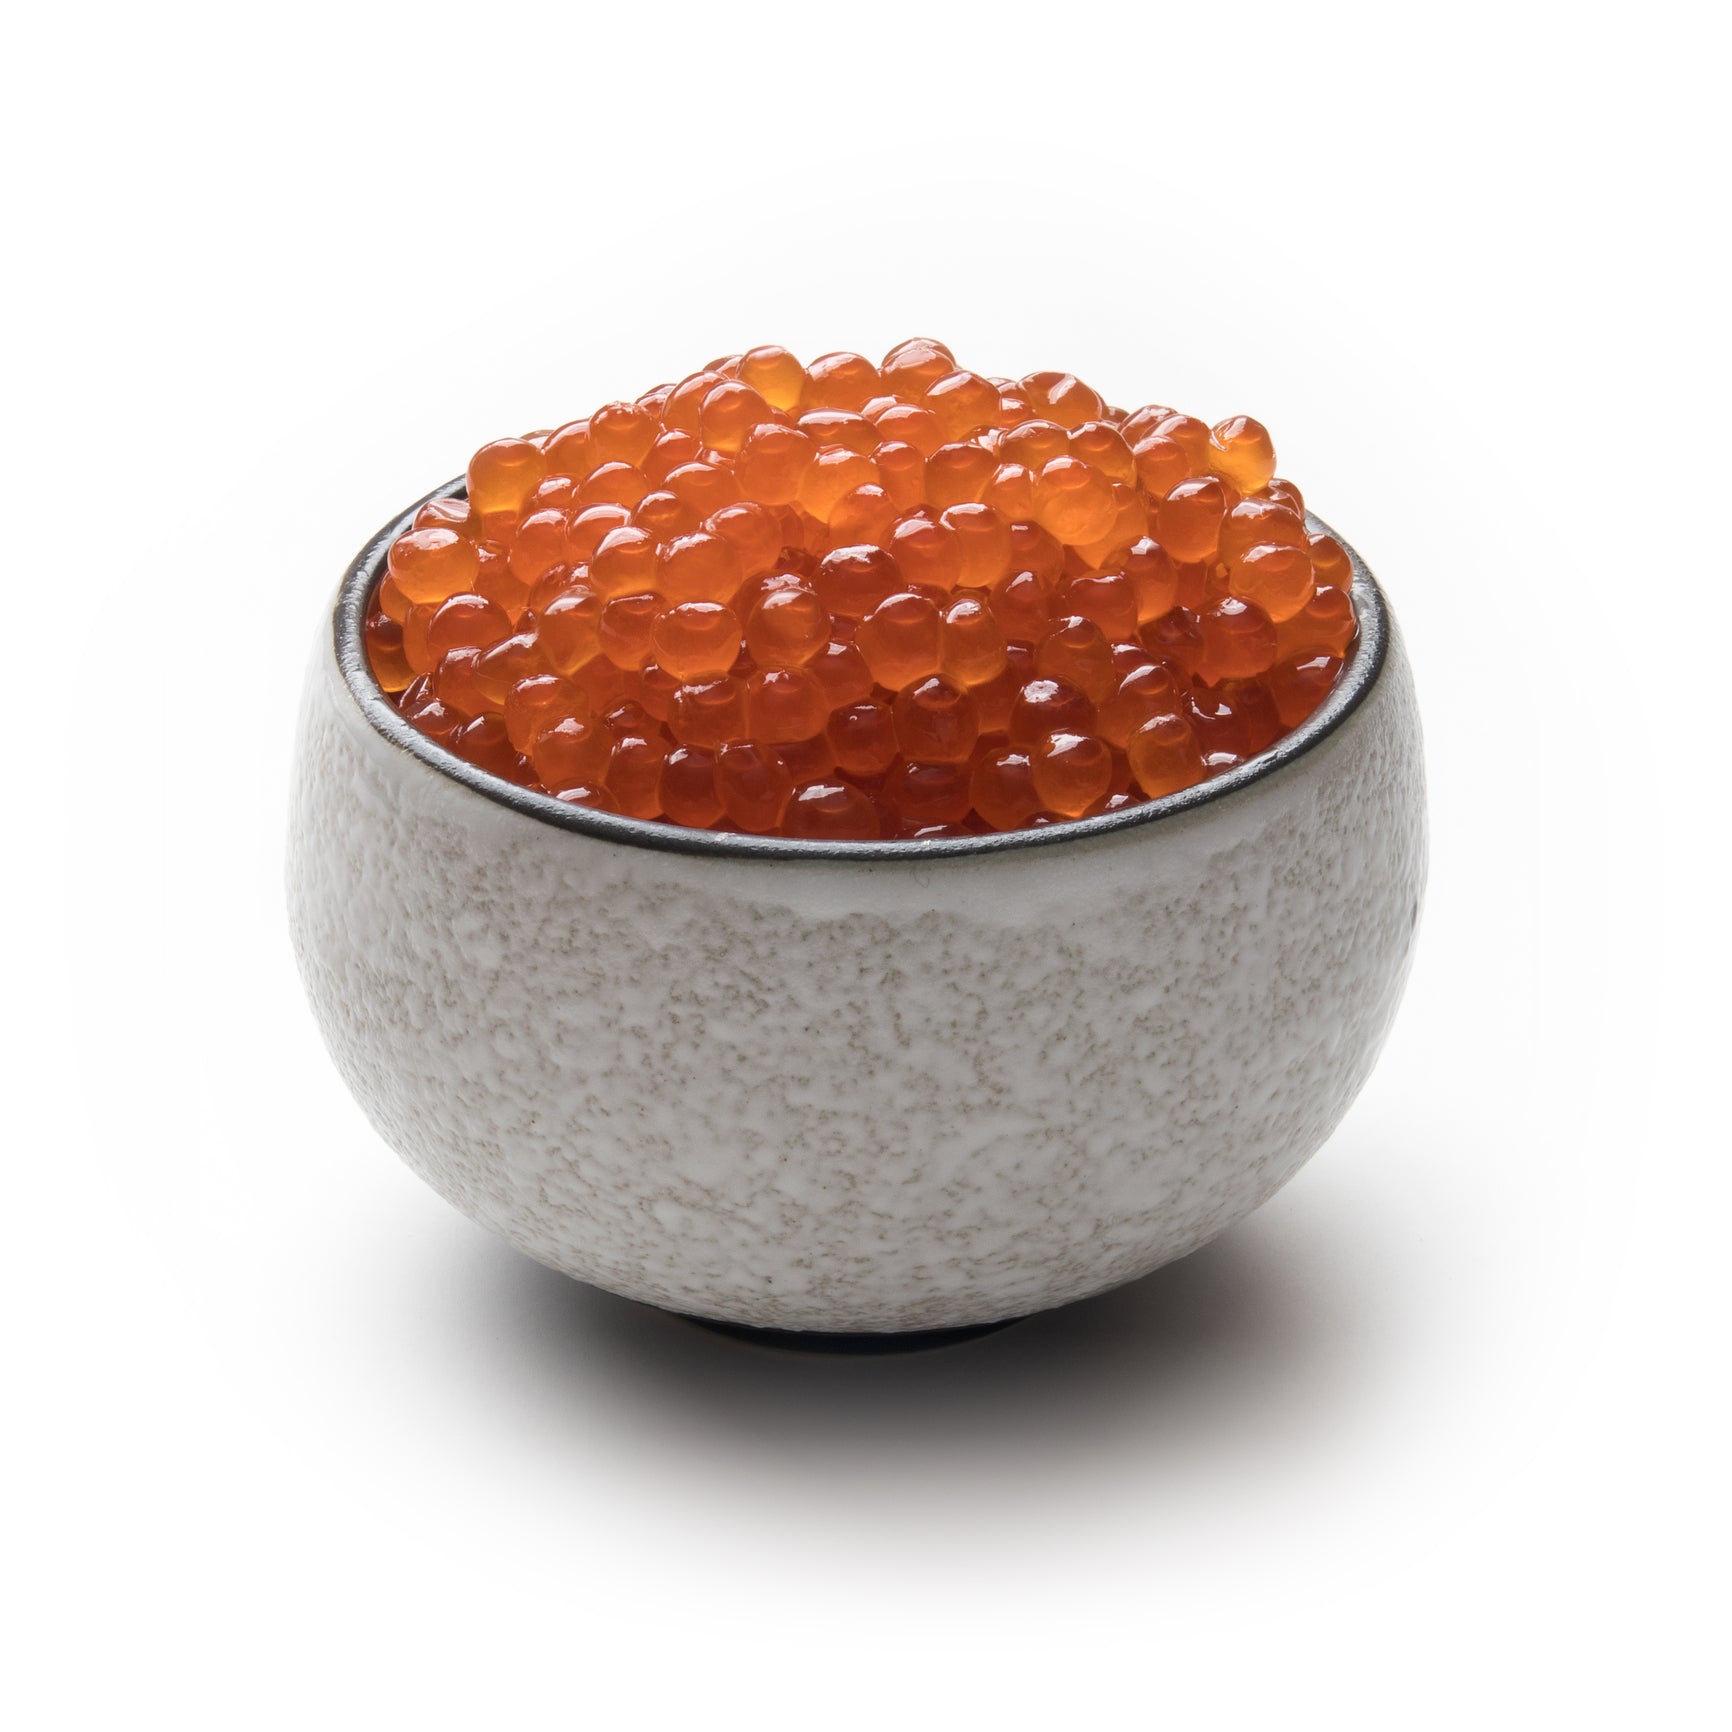 Salmon Roe Recipes You Can Make at Home